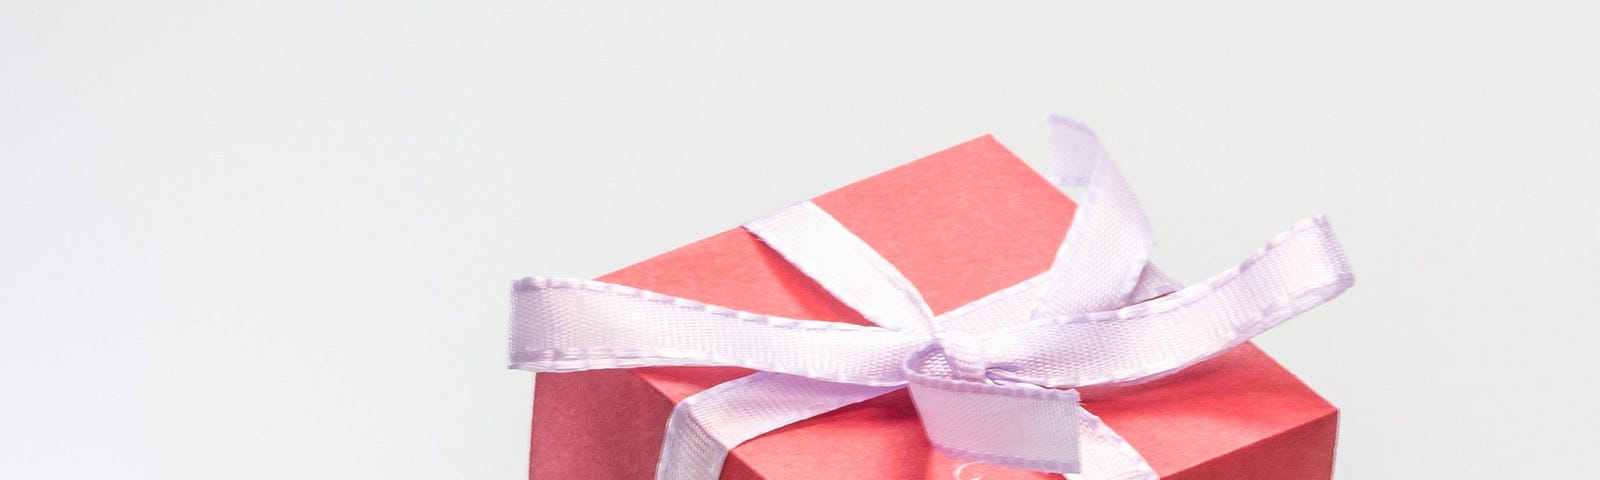 How to Pick a Gift that Will Make the Person Happy